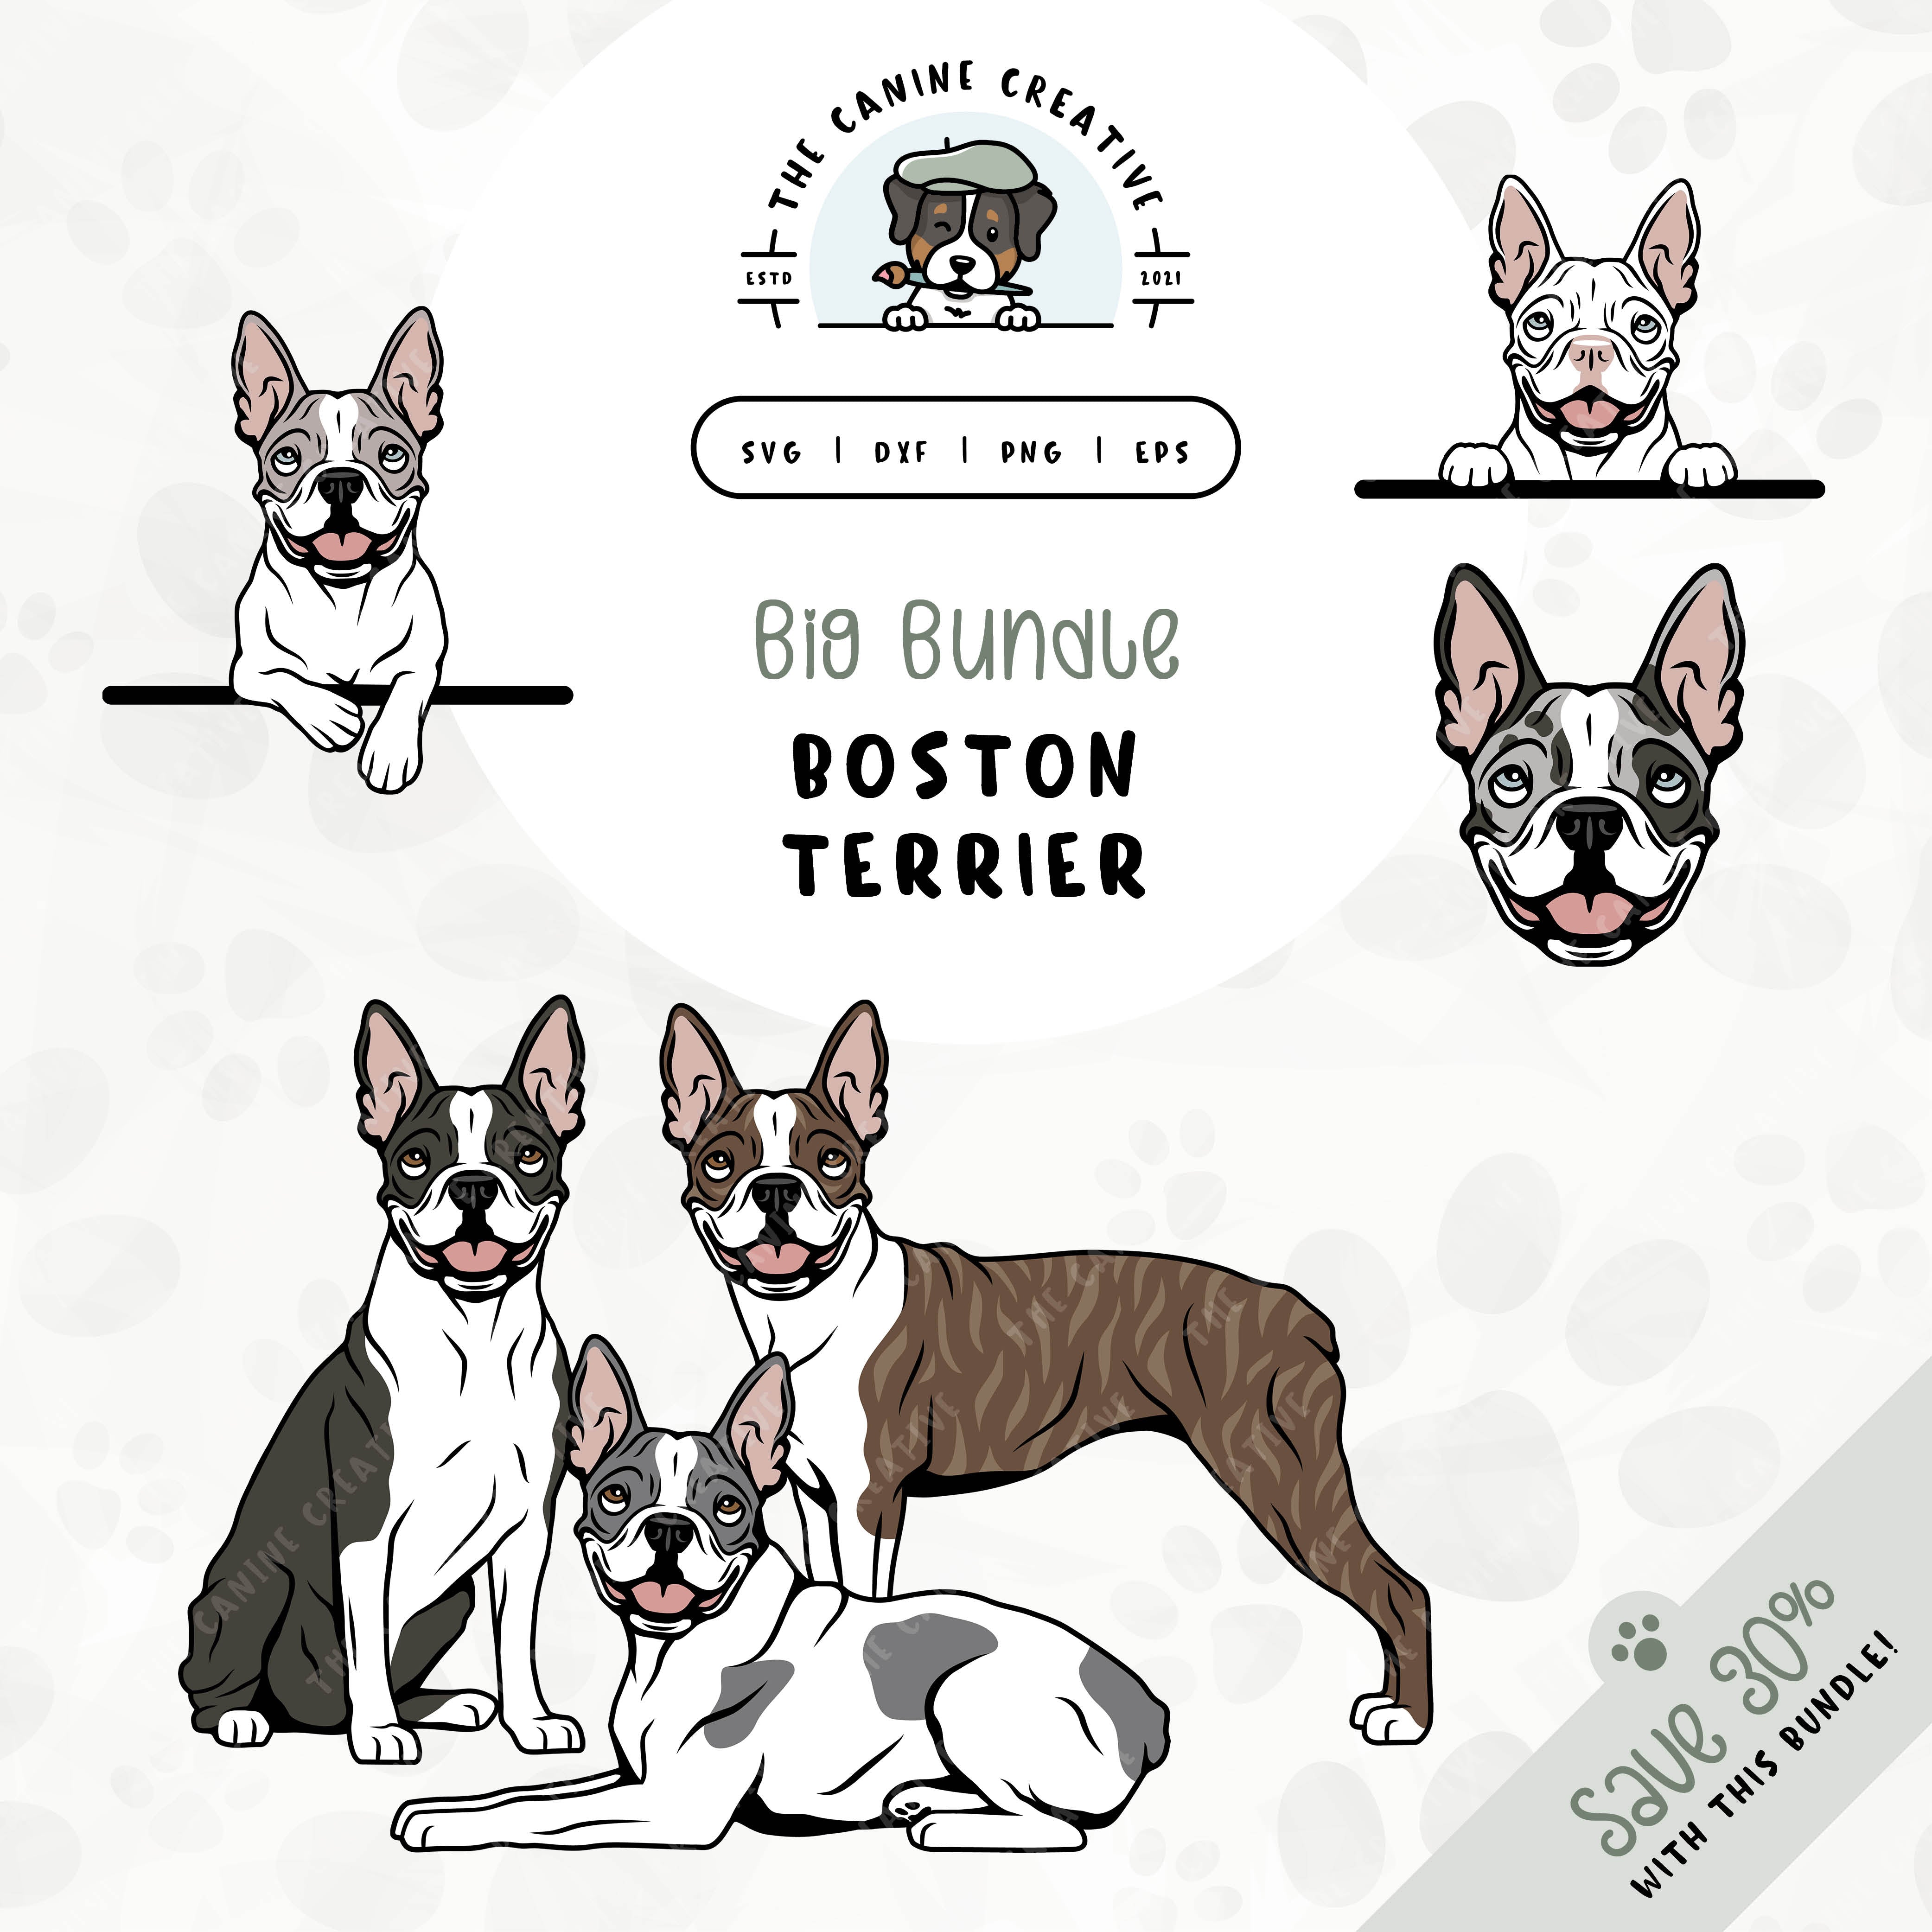 This 6-pack Boston Terrier design bundle includes dog faces and five different poses: sitting, standing, laying down, and peeking (2 options). File formats include: SVG, DXF, PNG, and EPS.